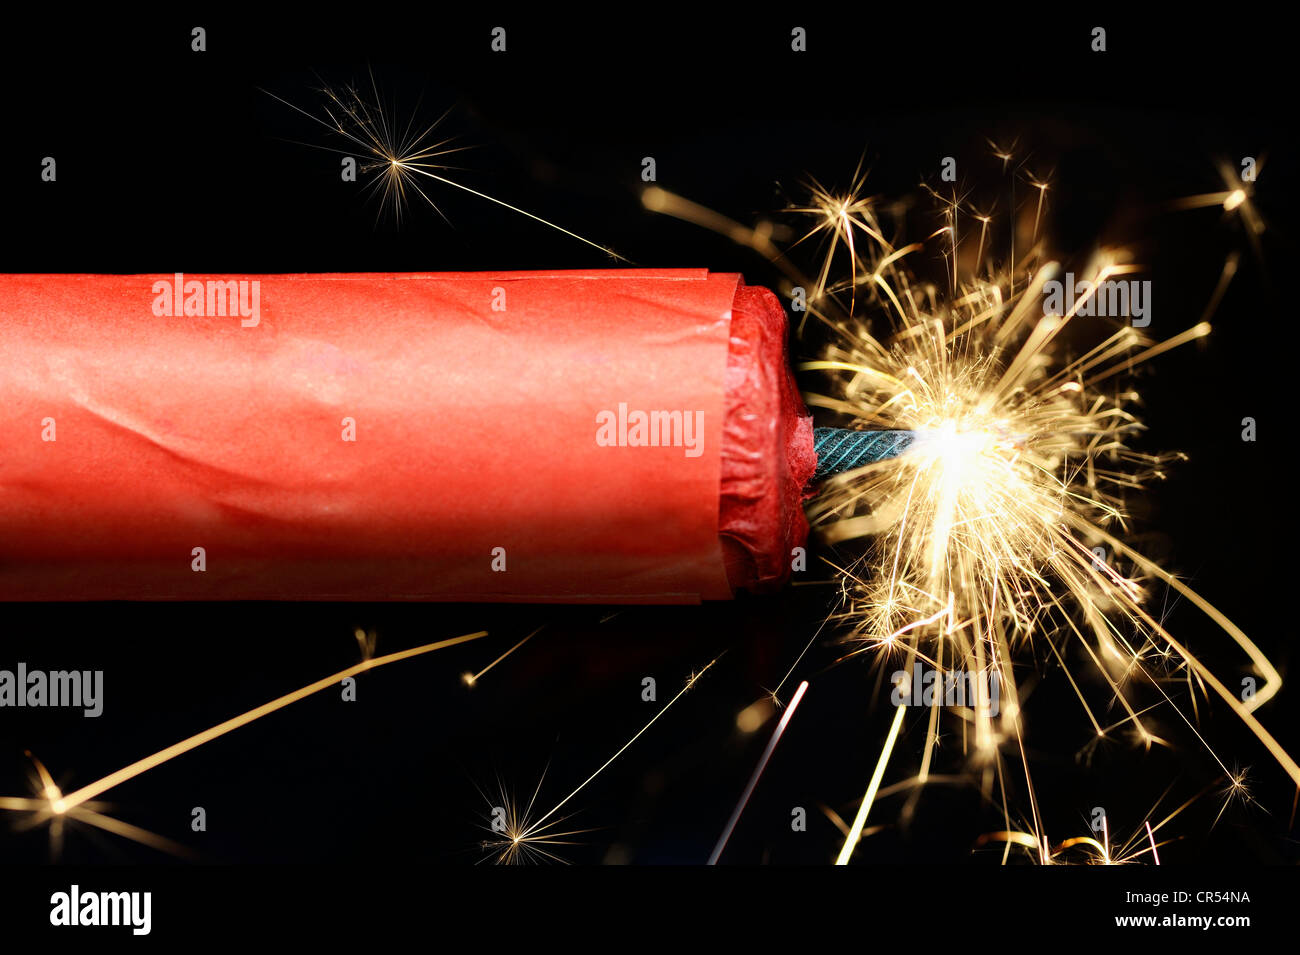 Dynamite Firecracker Green Fuse Burn With Sparks And Smoke Stock Photo -  Download Image Now - iStock